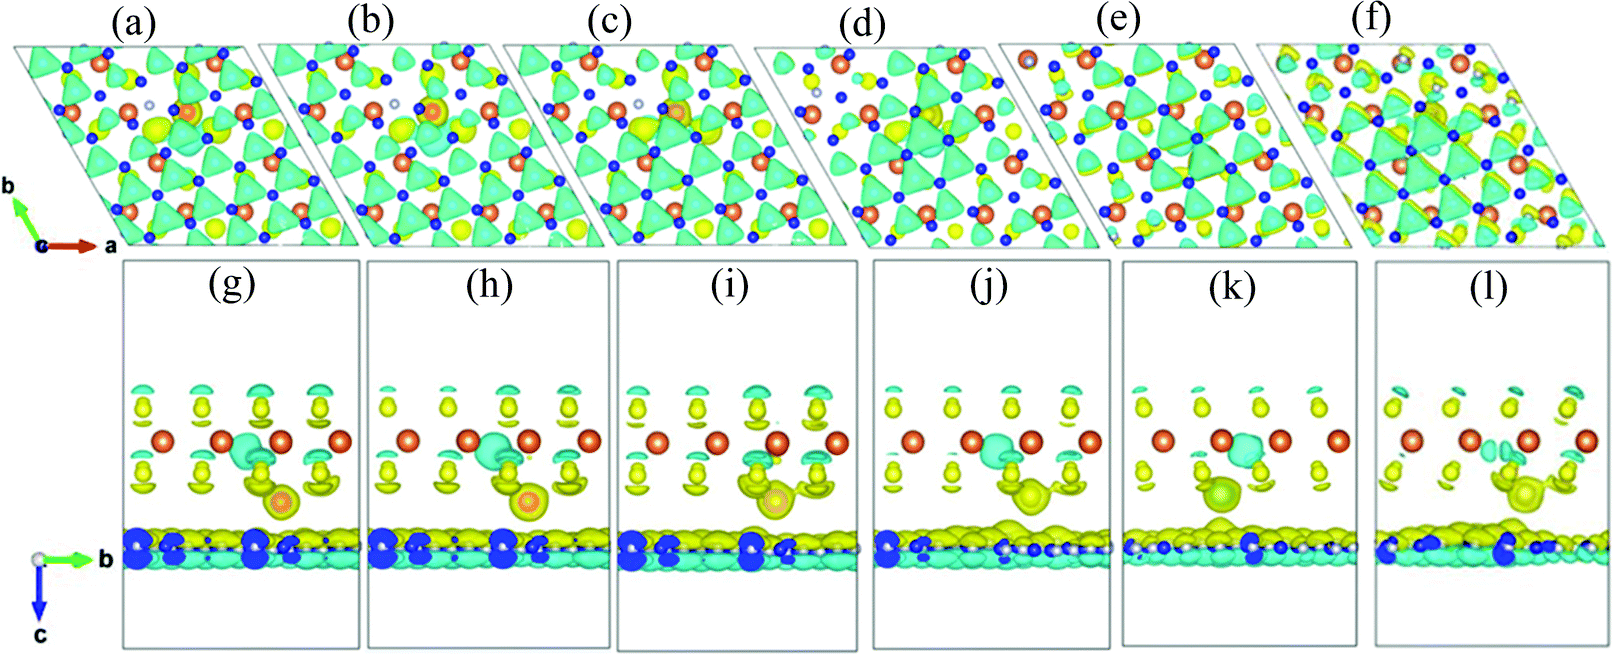 The Electronic And Magnetic Properties Of H Bn Mos 2 Heterostructures Intercalated With 3d Transition Metal Atoms Physical Chemistry Chemical Physics Rsc Publishing Doi 10 1039 D0cpj